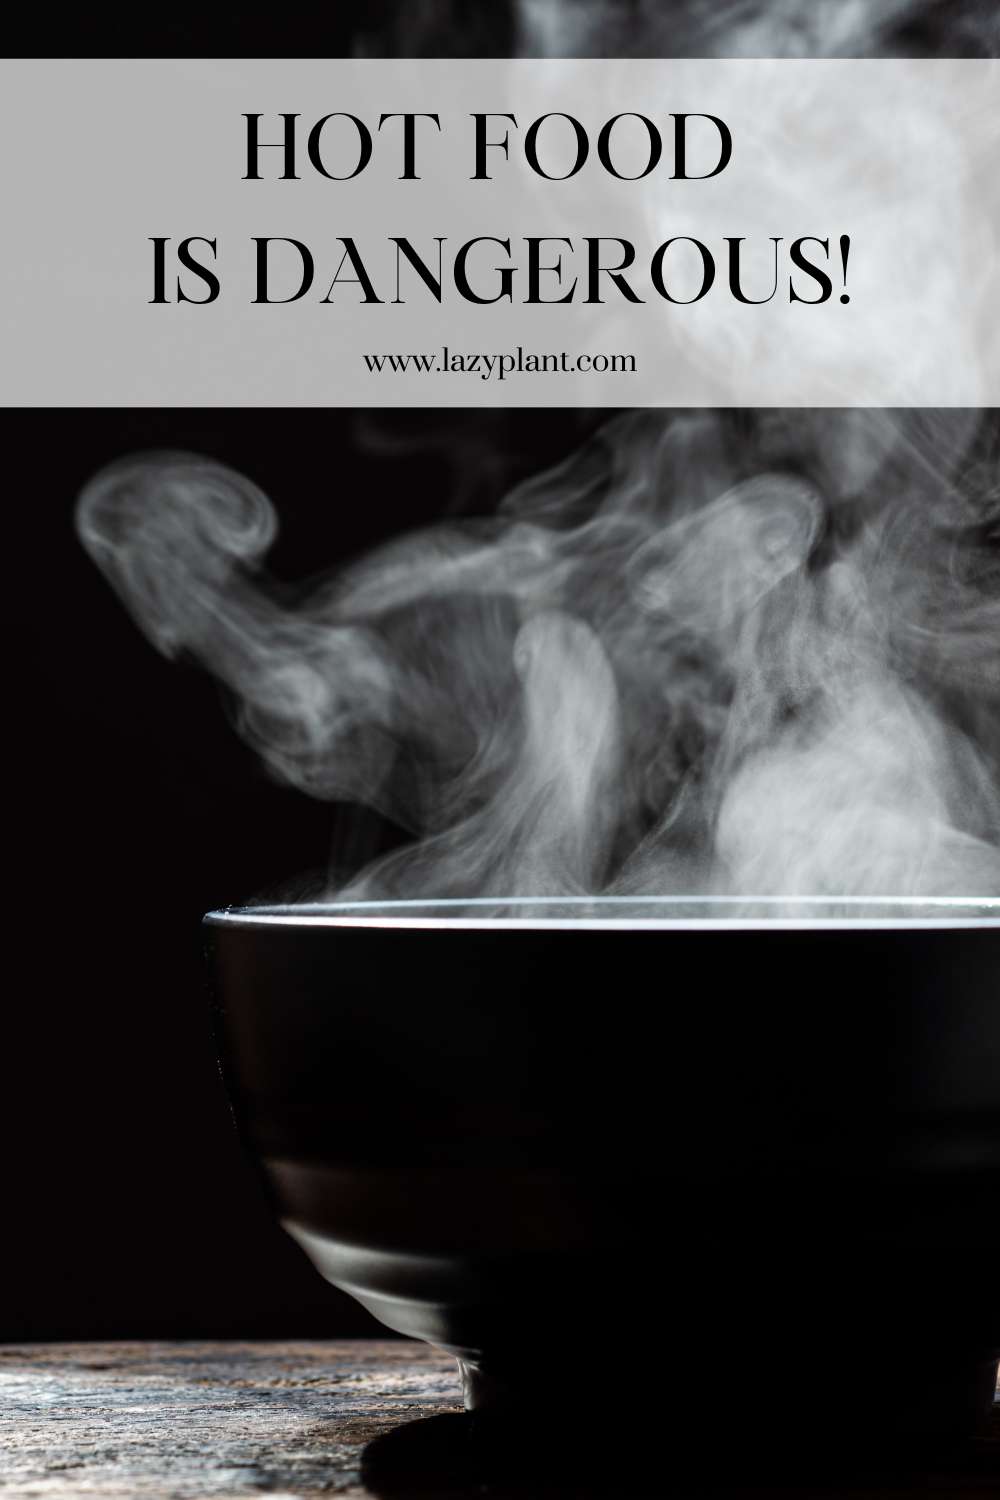 Hot foods & beverages are dangerous for health.